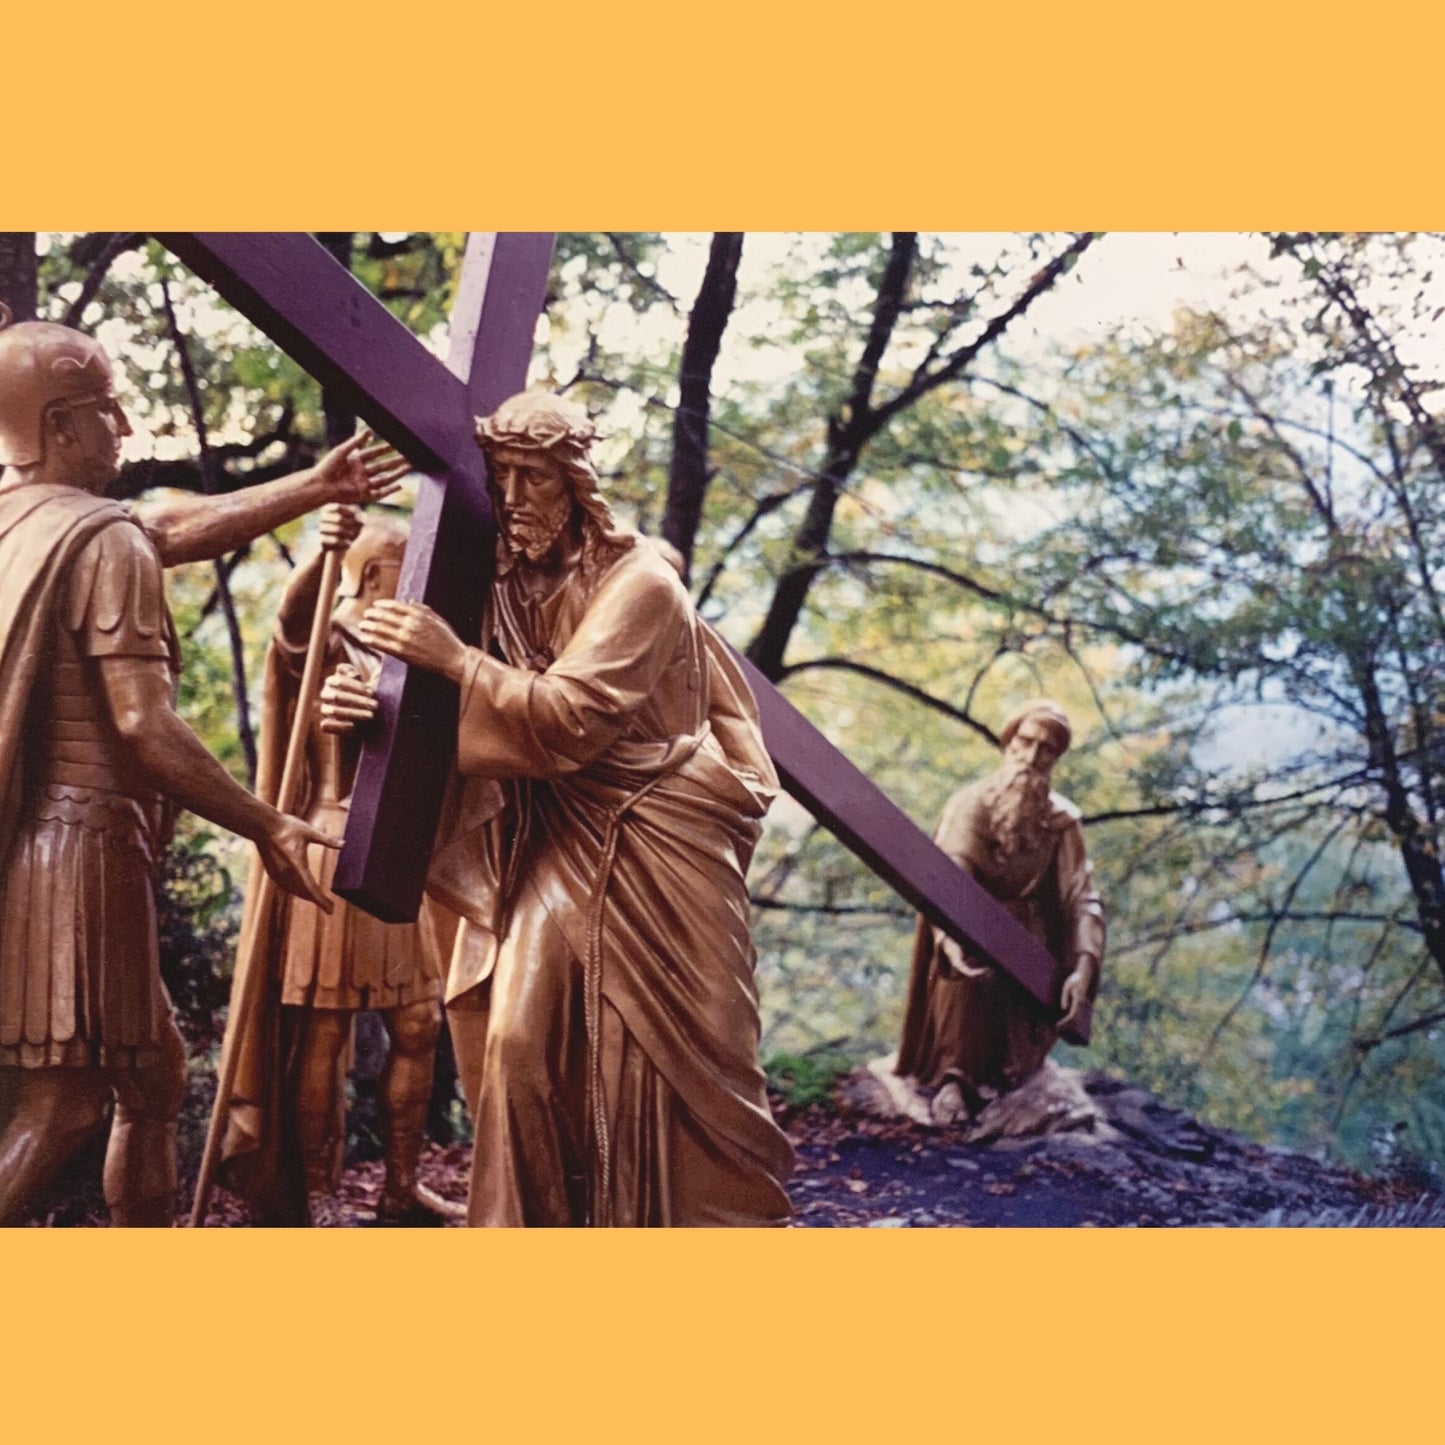 Way of the Cross at Lourdes video download MP4 - Bob and Penny Lord